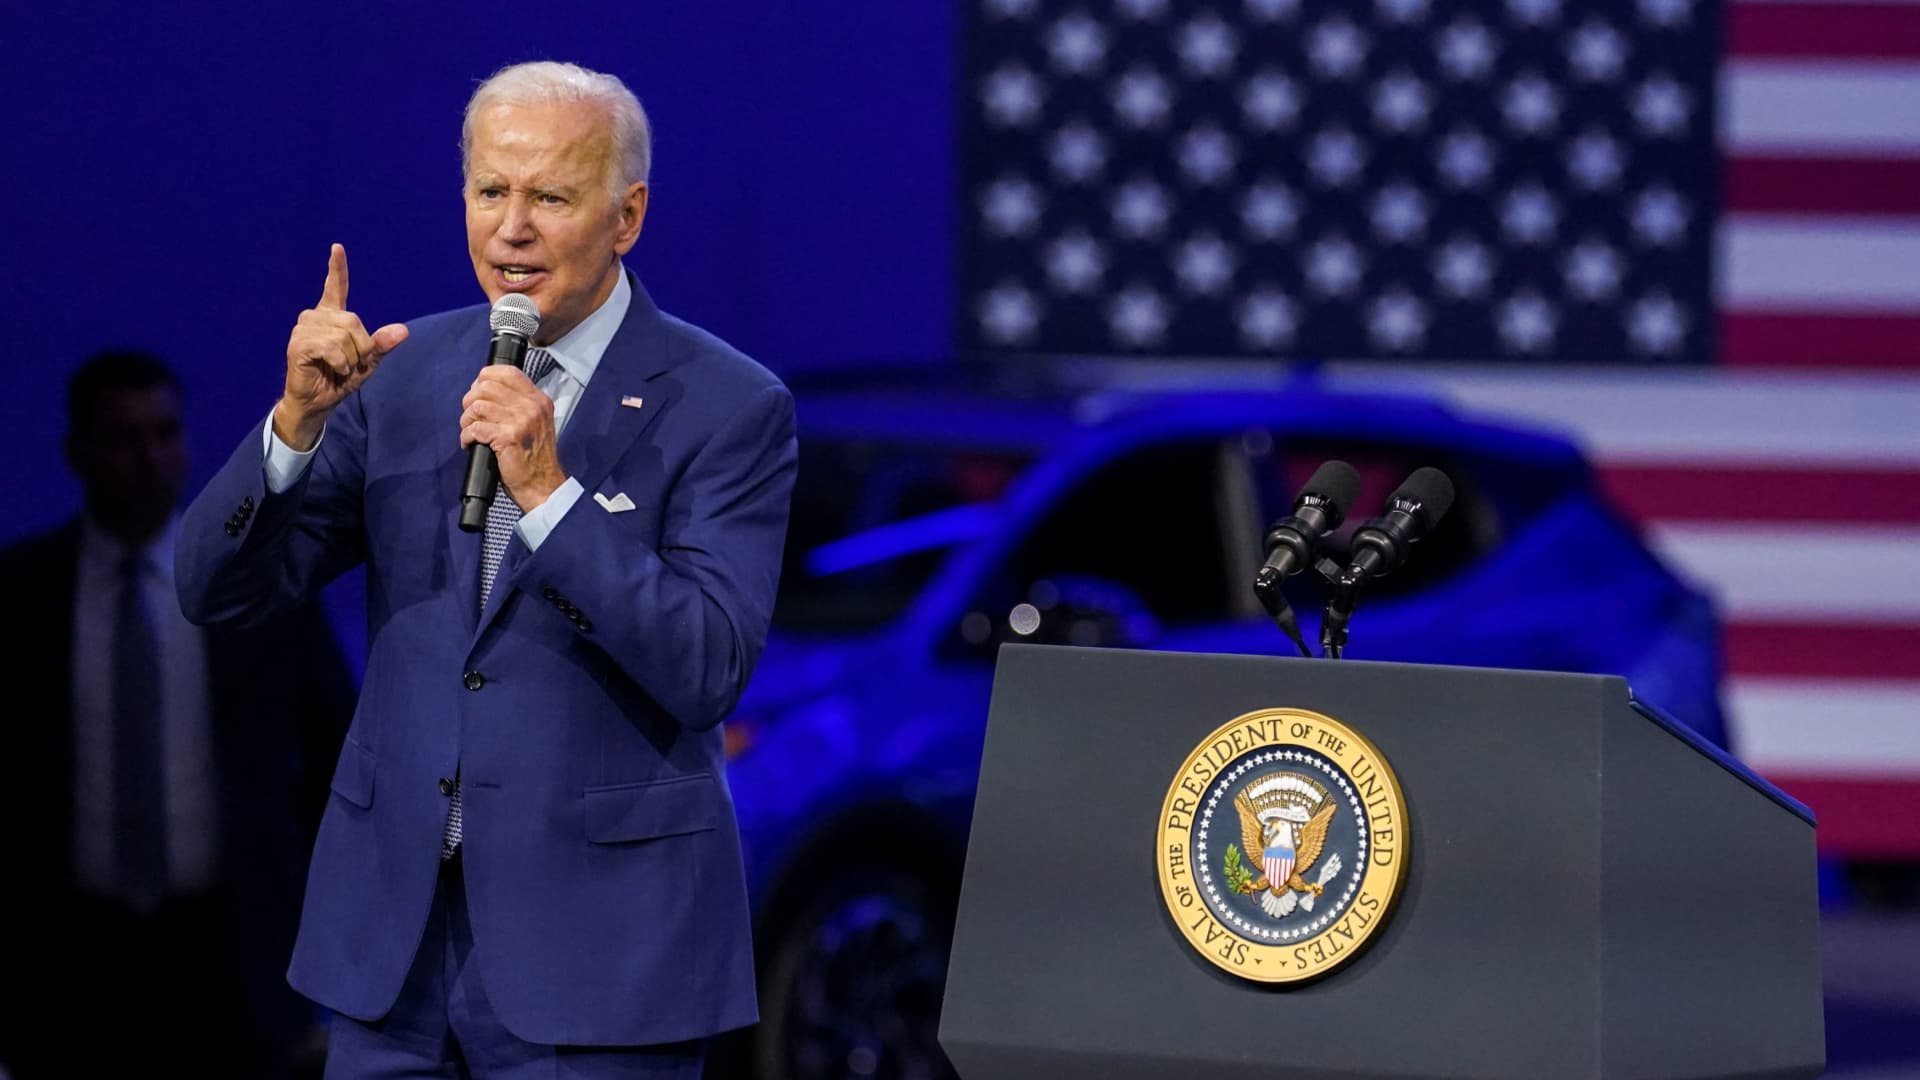 Biden announces first round of funding for EV charging network across 35 states